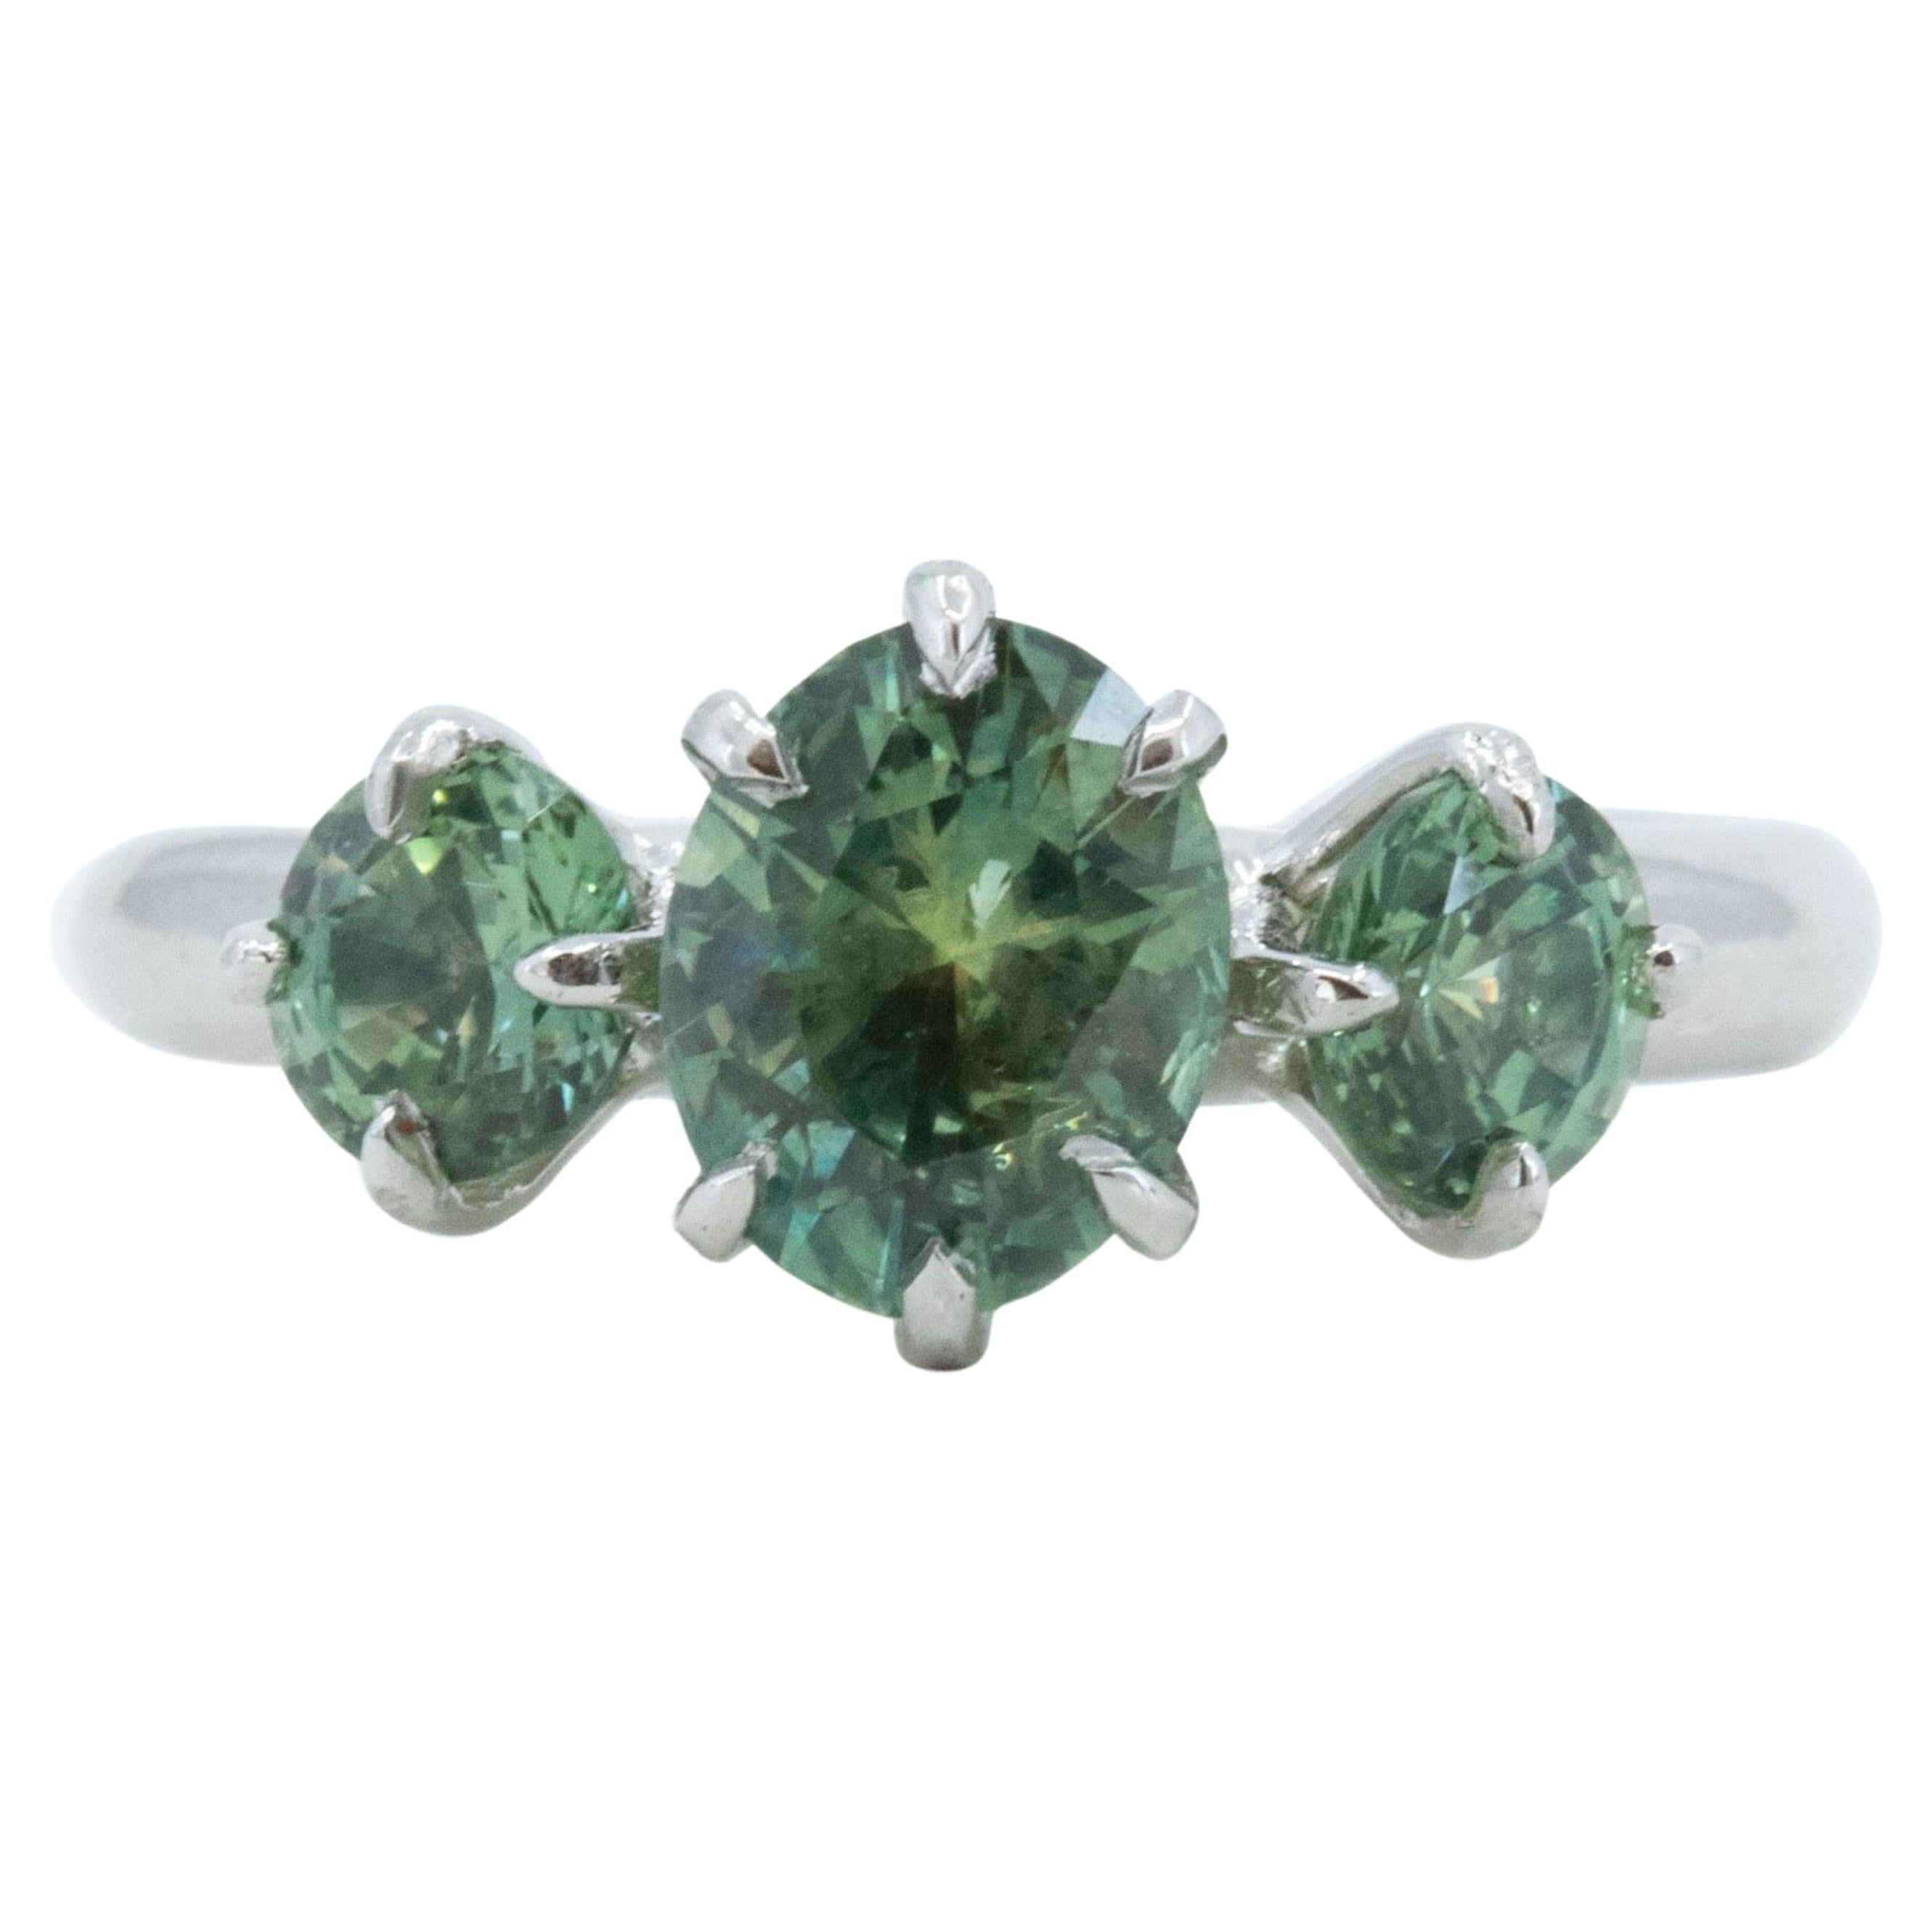 For Sale:  2.5 Carat Oval Cut Natural Green Sapphire Engagement Rings, Three-Stone Ring